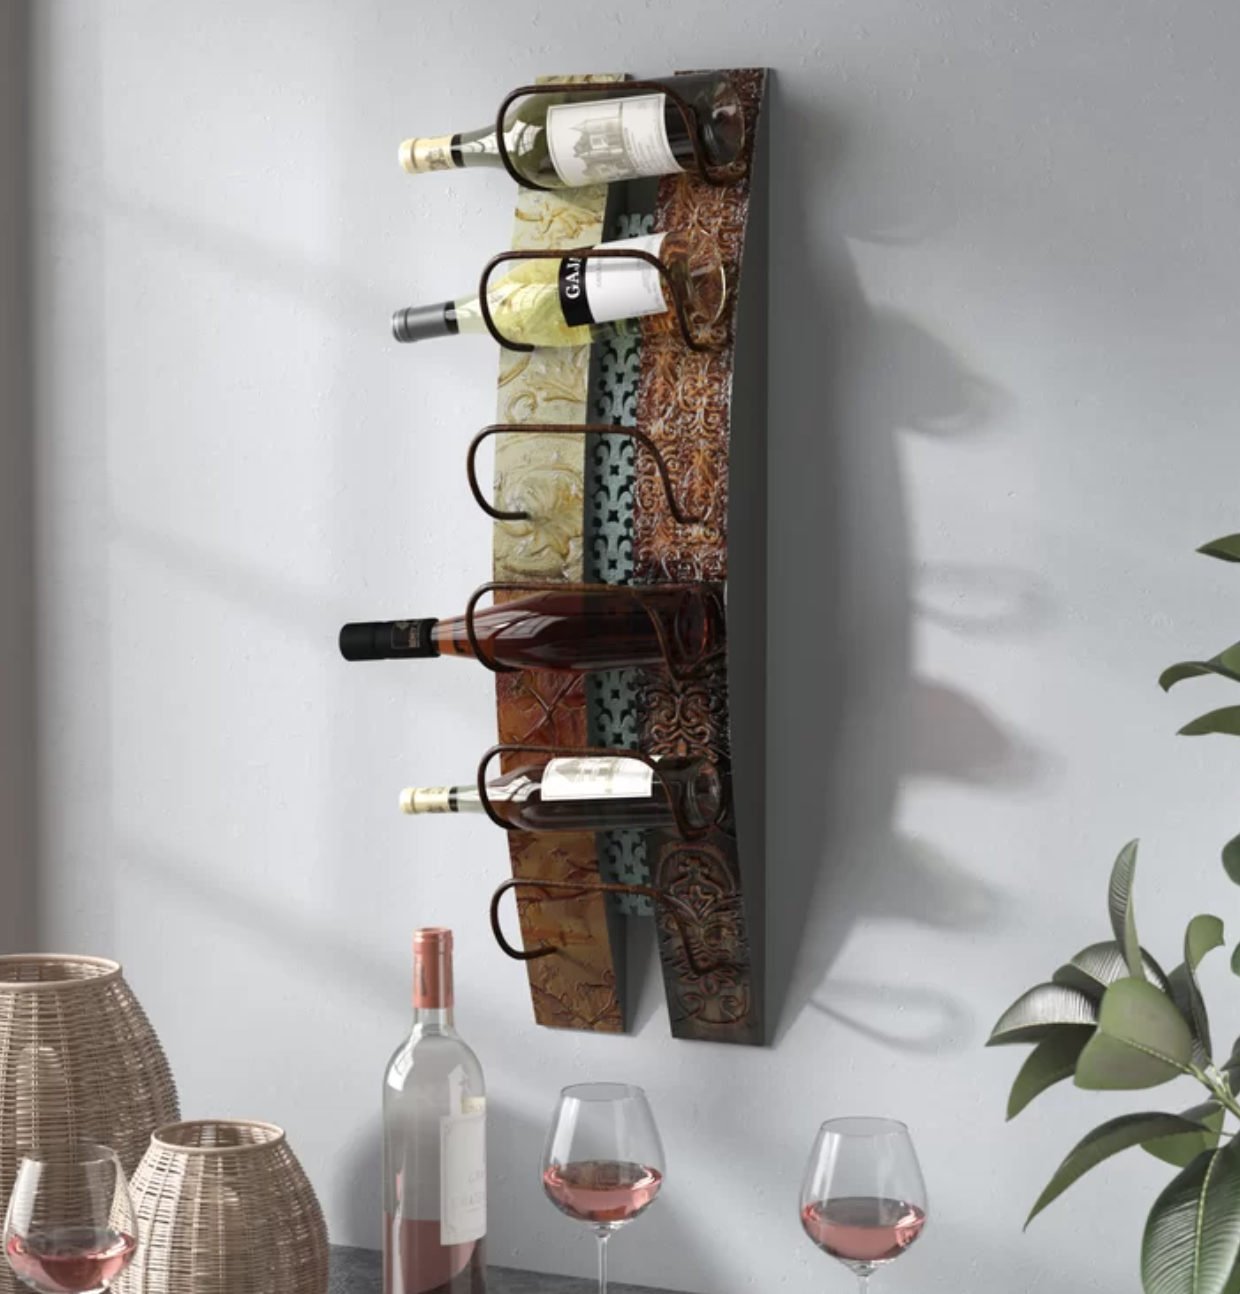 The wine rack mounted on a wall, holding four bottles of wine with two empty holders